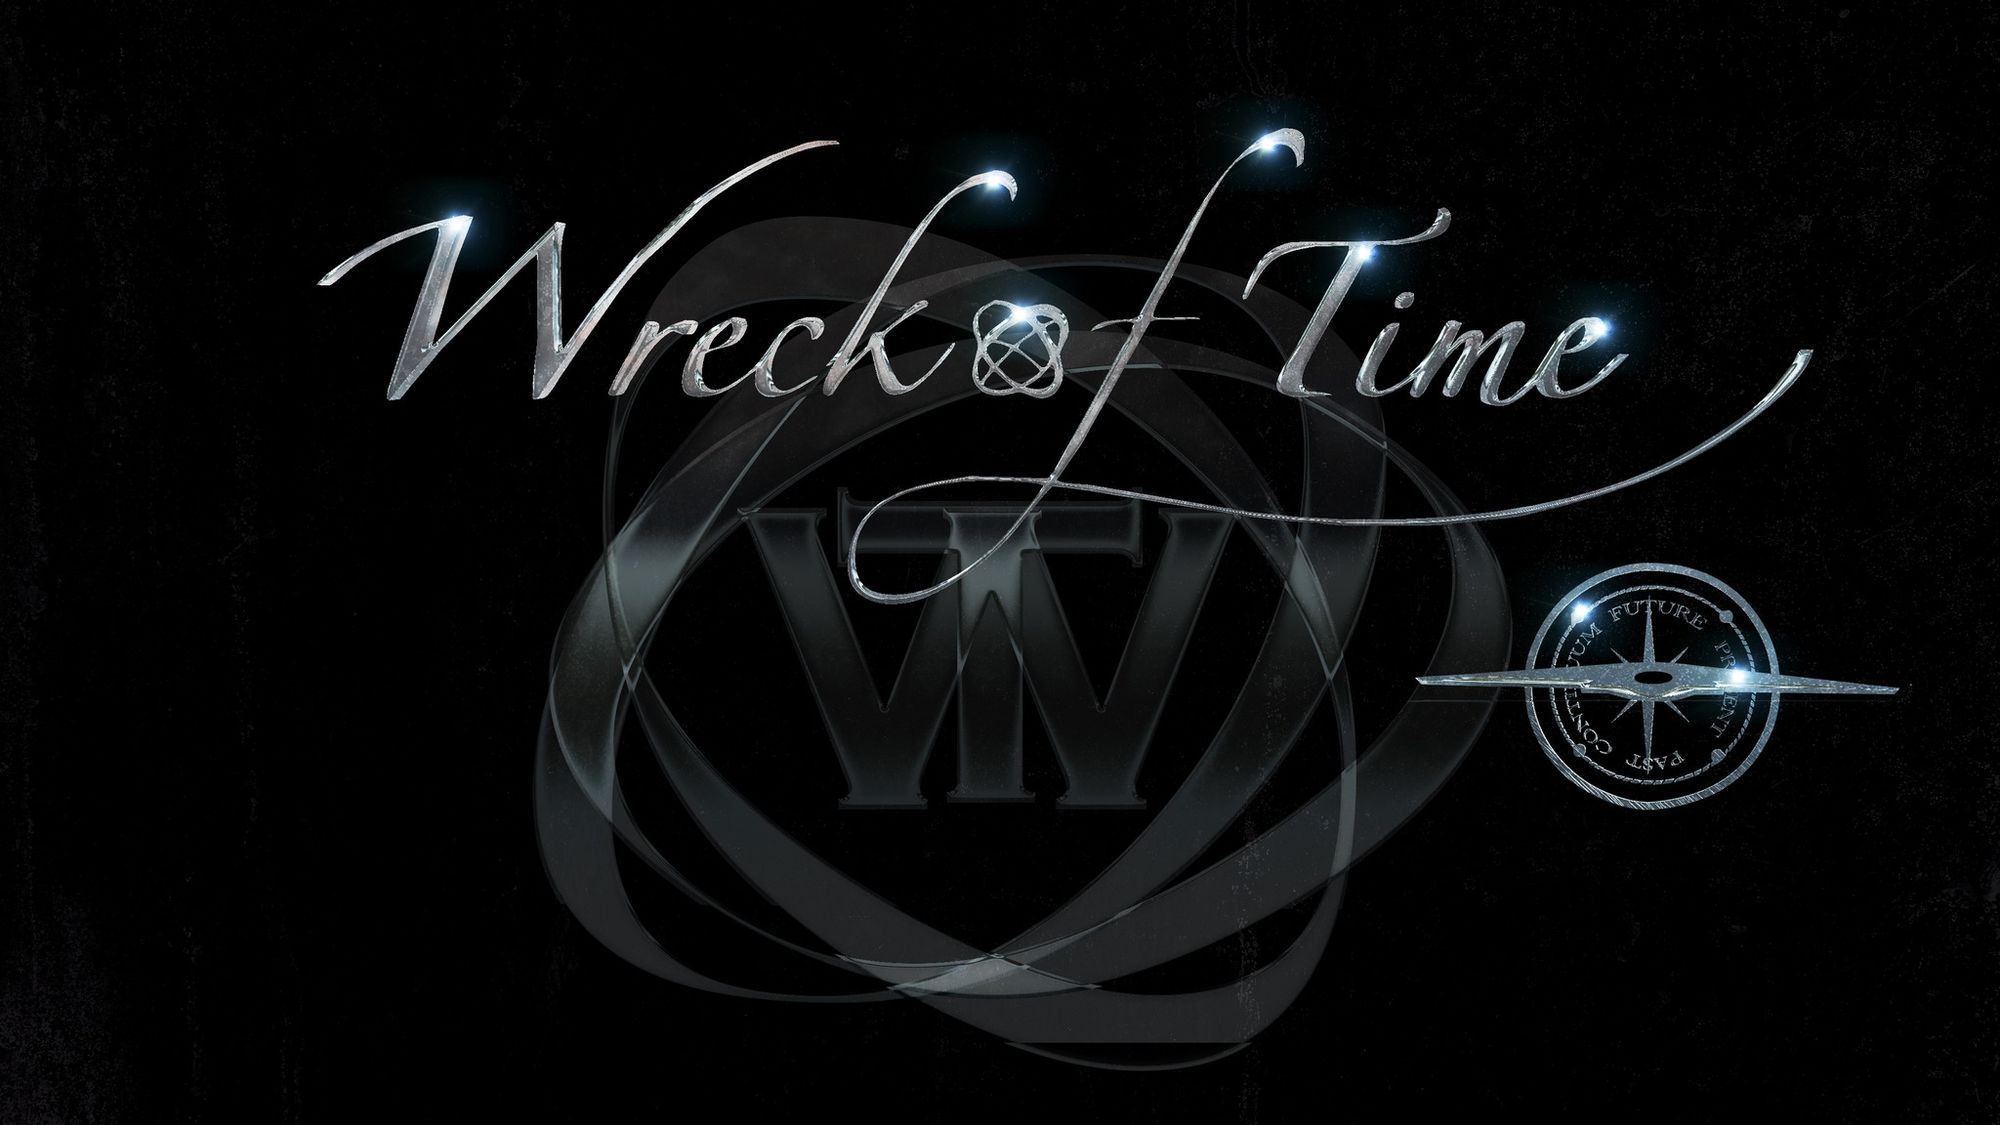 Press Release: The Element, now Wreck of Time